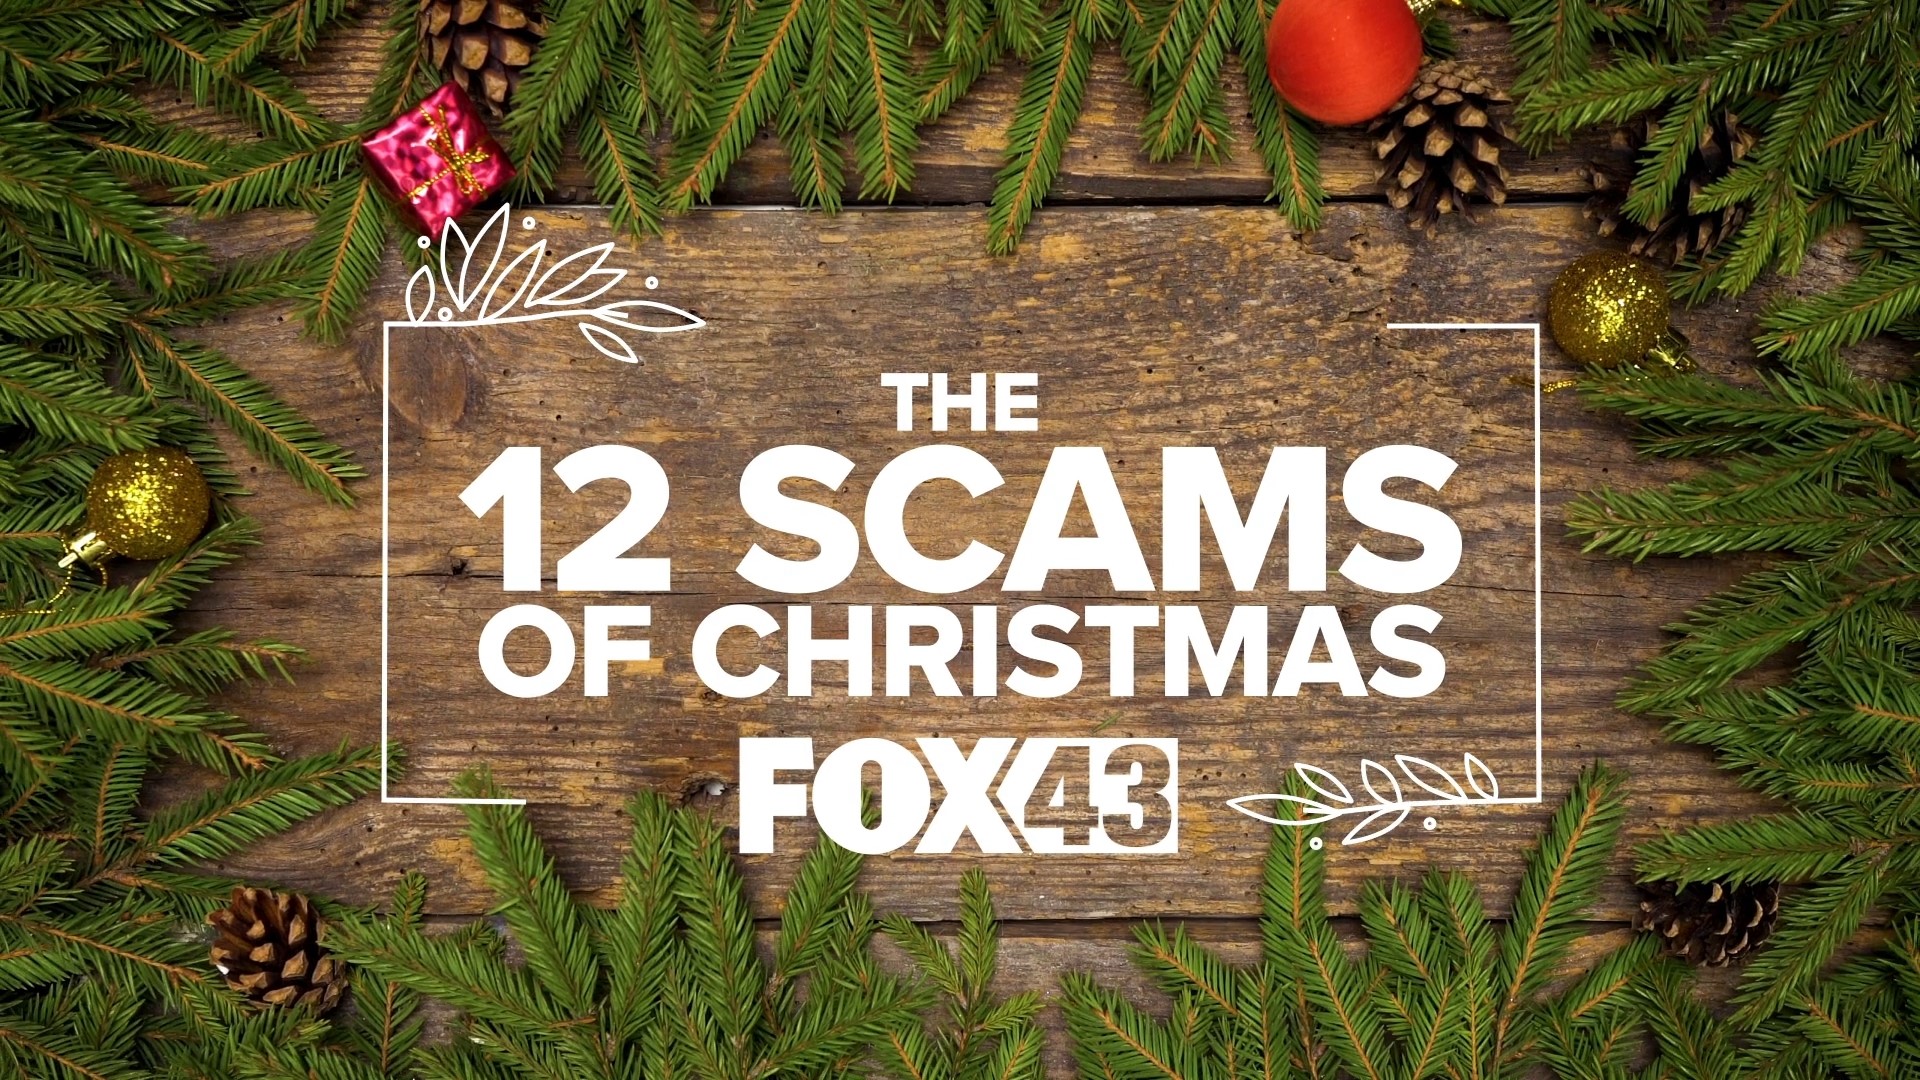 Certain holiday-themed apps with in-app purchases the list of 12 scams of Christmas.